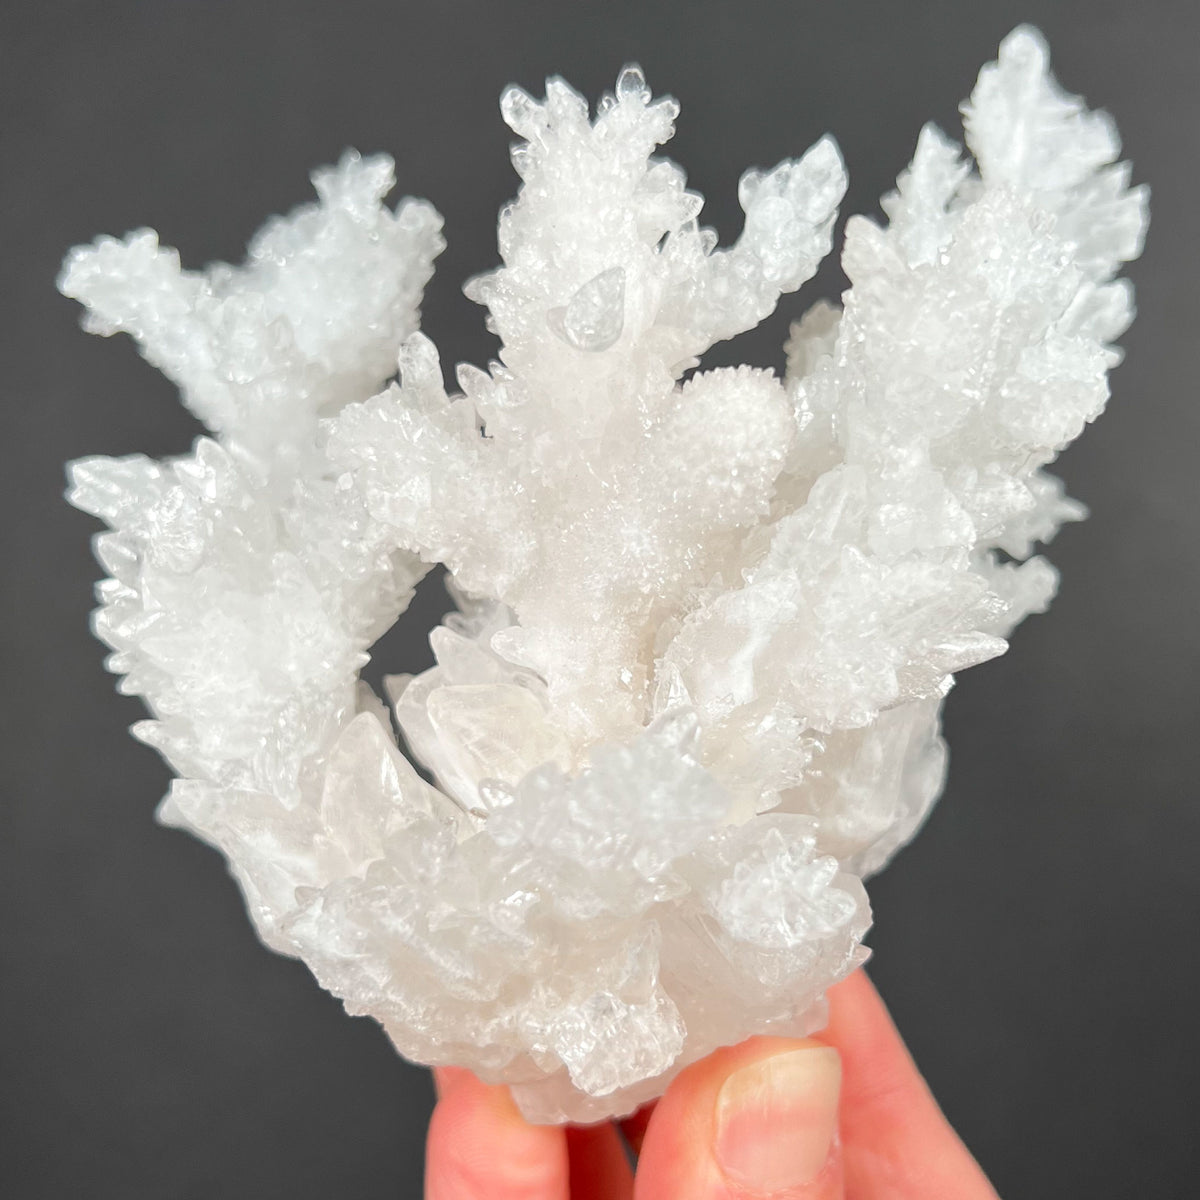 Crystals of Aragonite and Calcite from Mexico